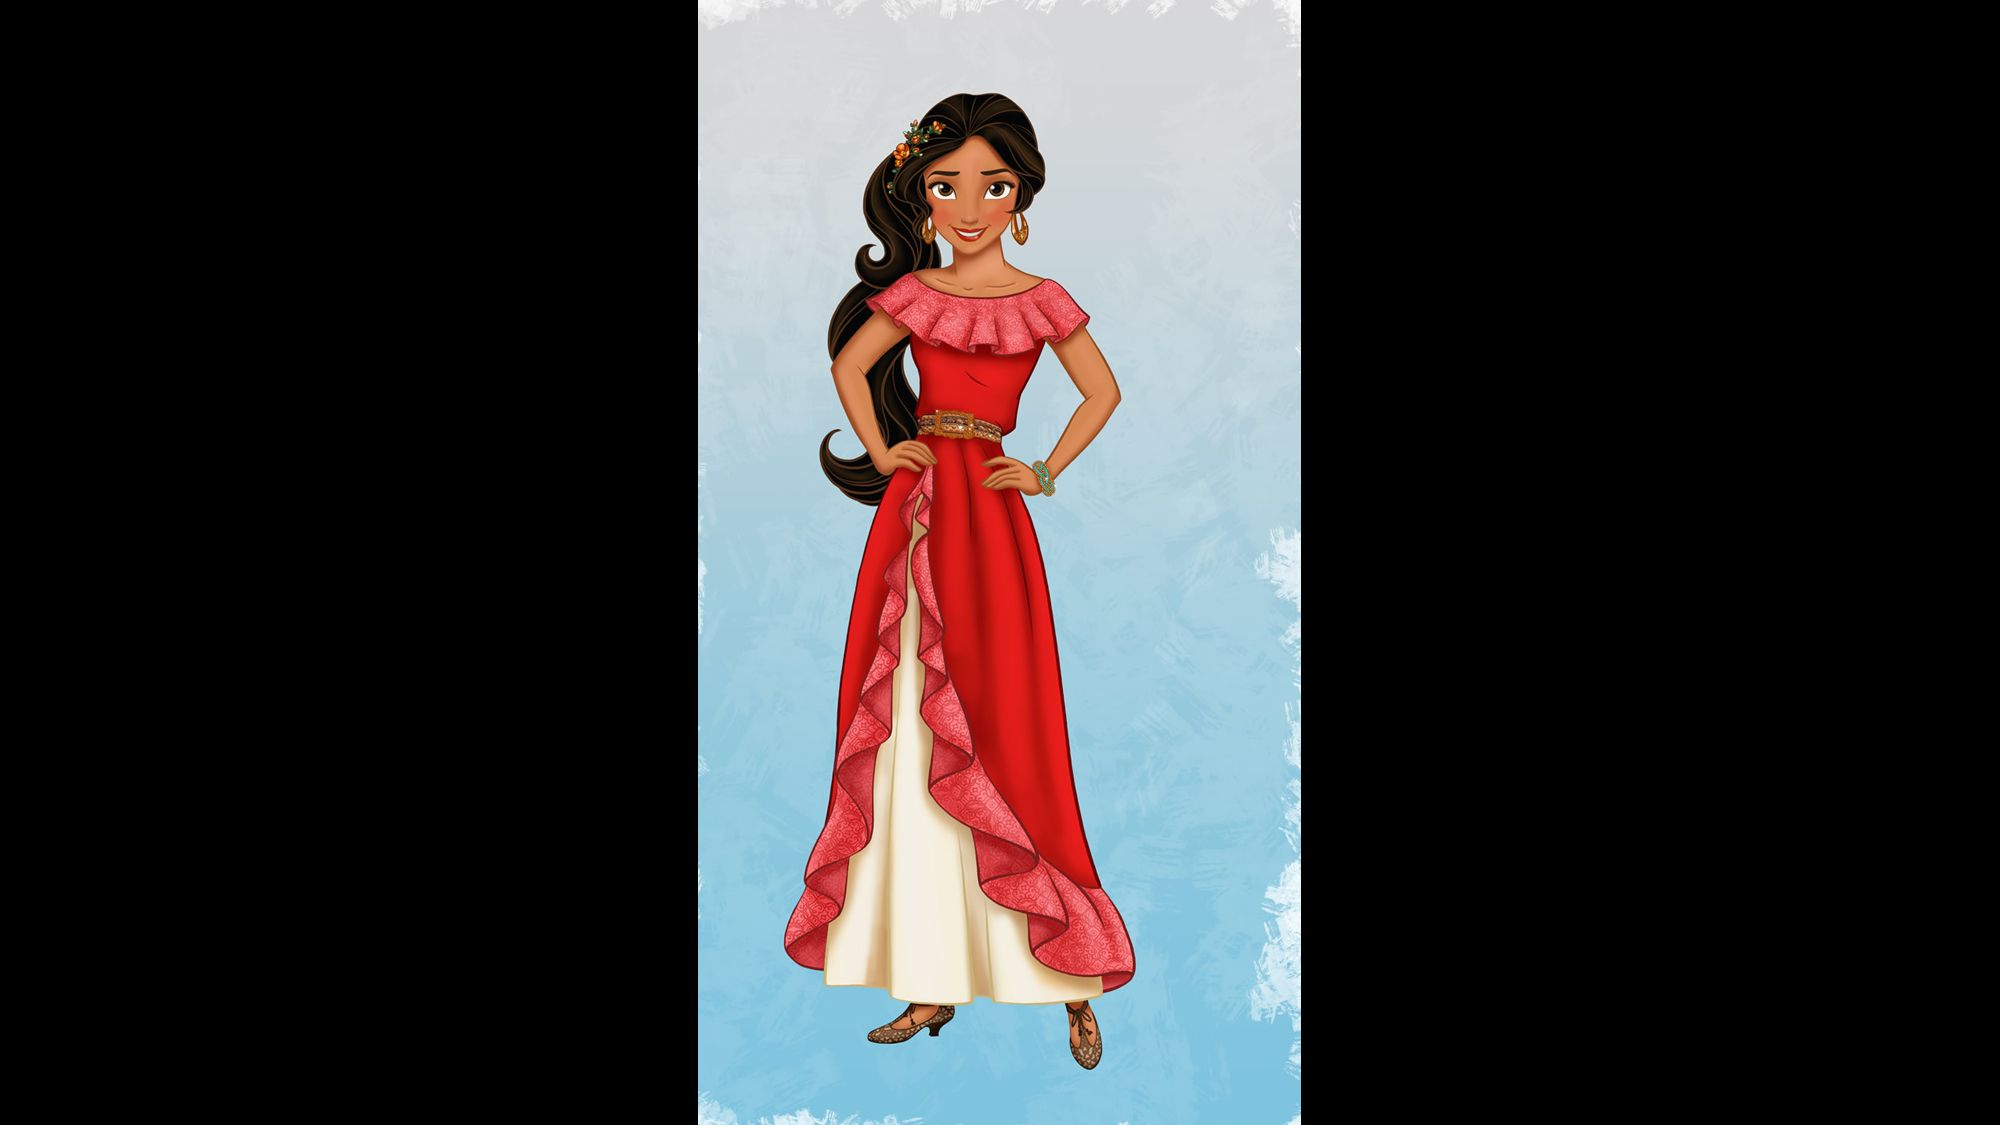 Disney's princesses and other animated heroines | CNN